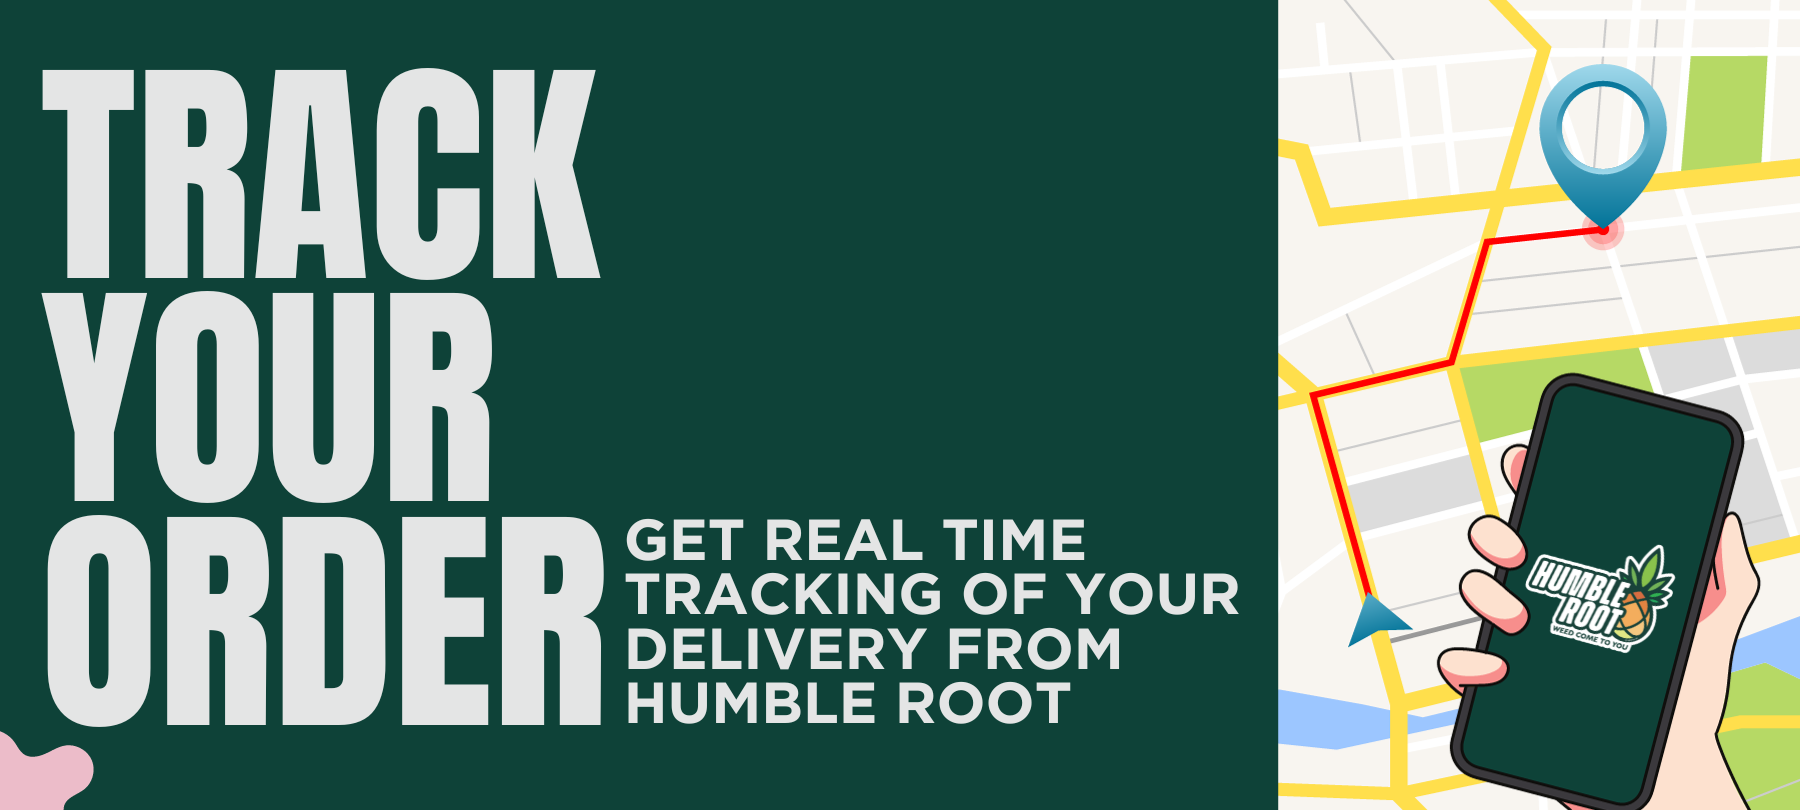 Track your order with Humble Root